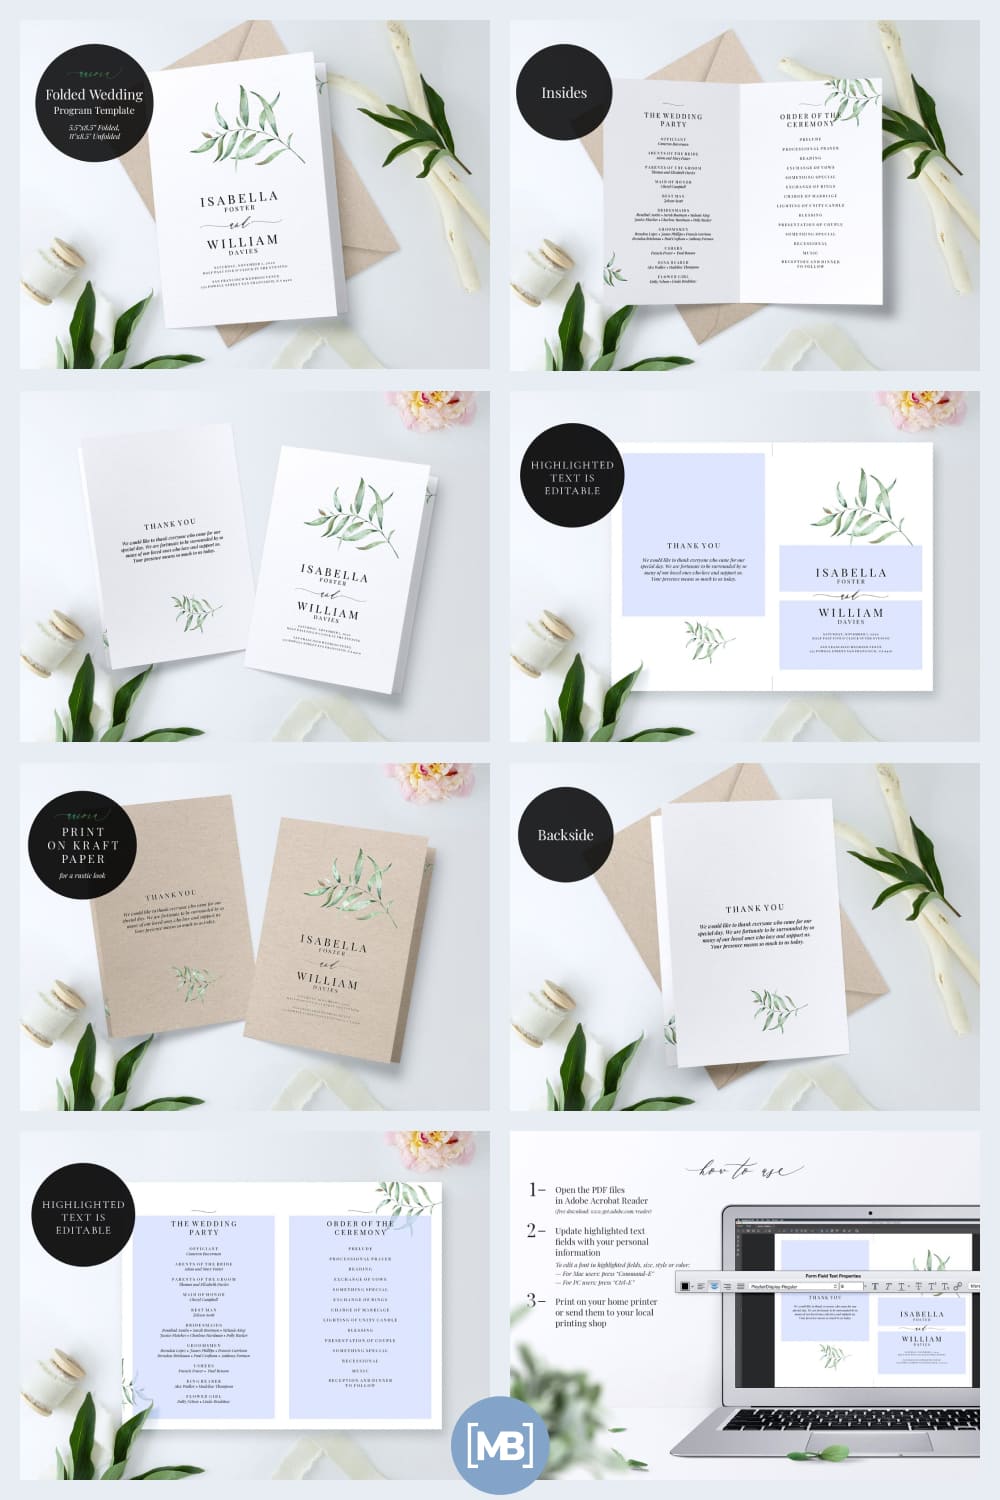 Very light and gentle invitations.